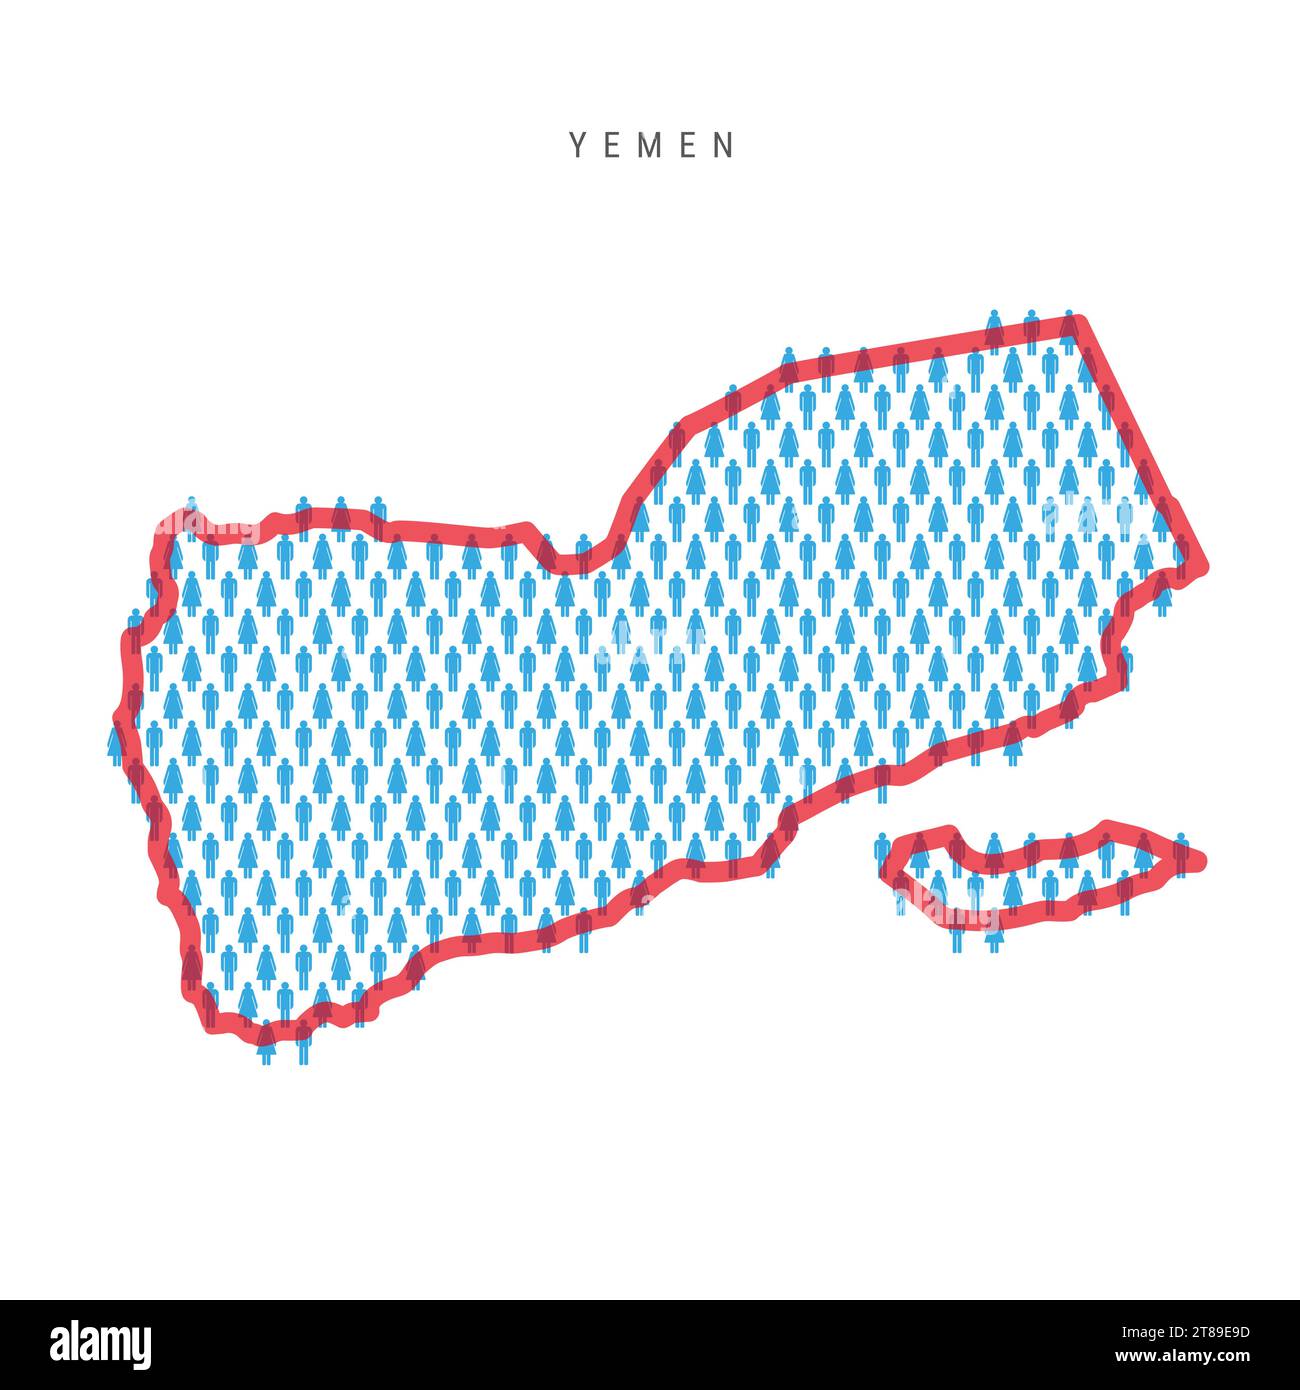 Yemen population map. Stick figures Yemeni people map with bold red translucent country border. Pattern of men and women icons. Isolated vector illust Stock Vector